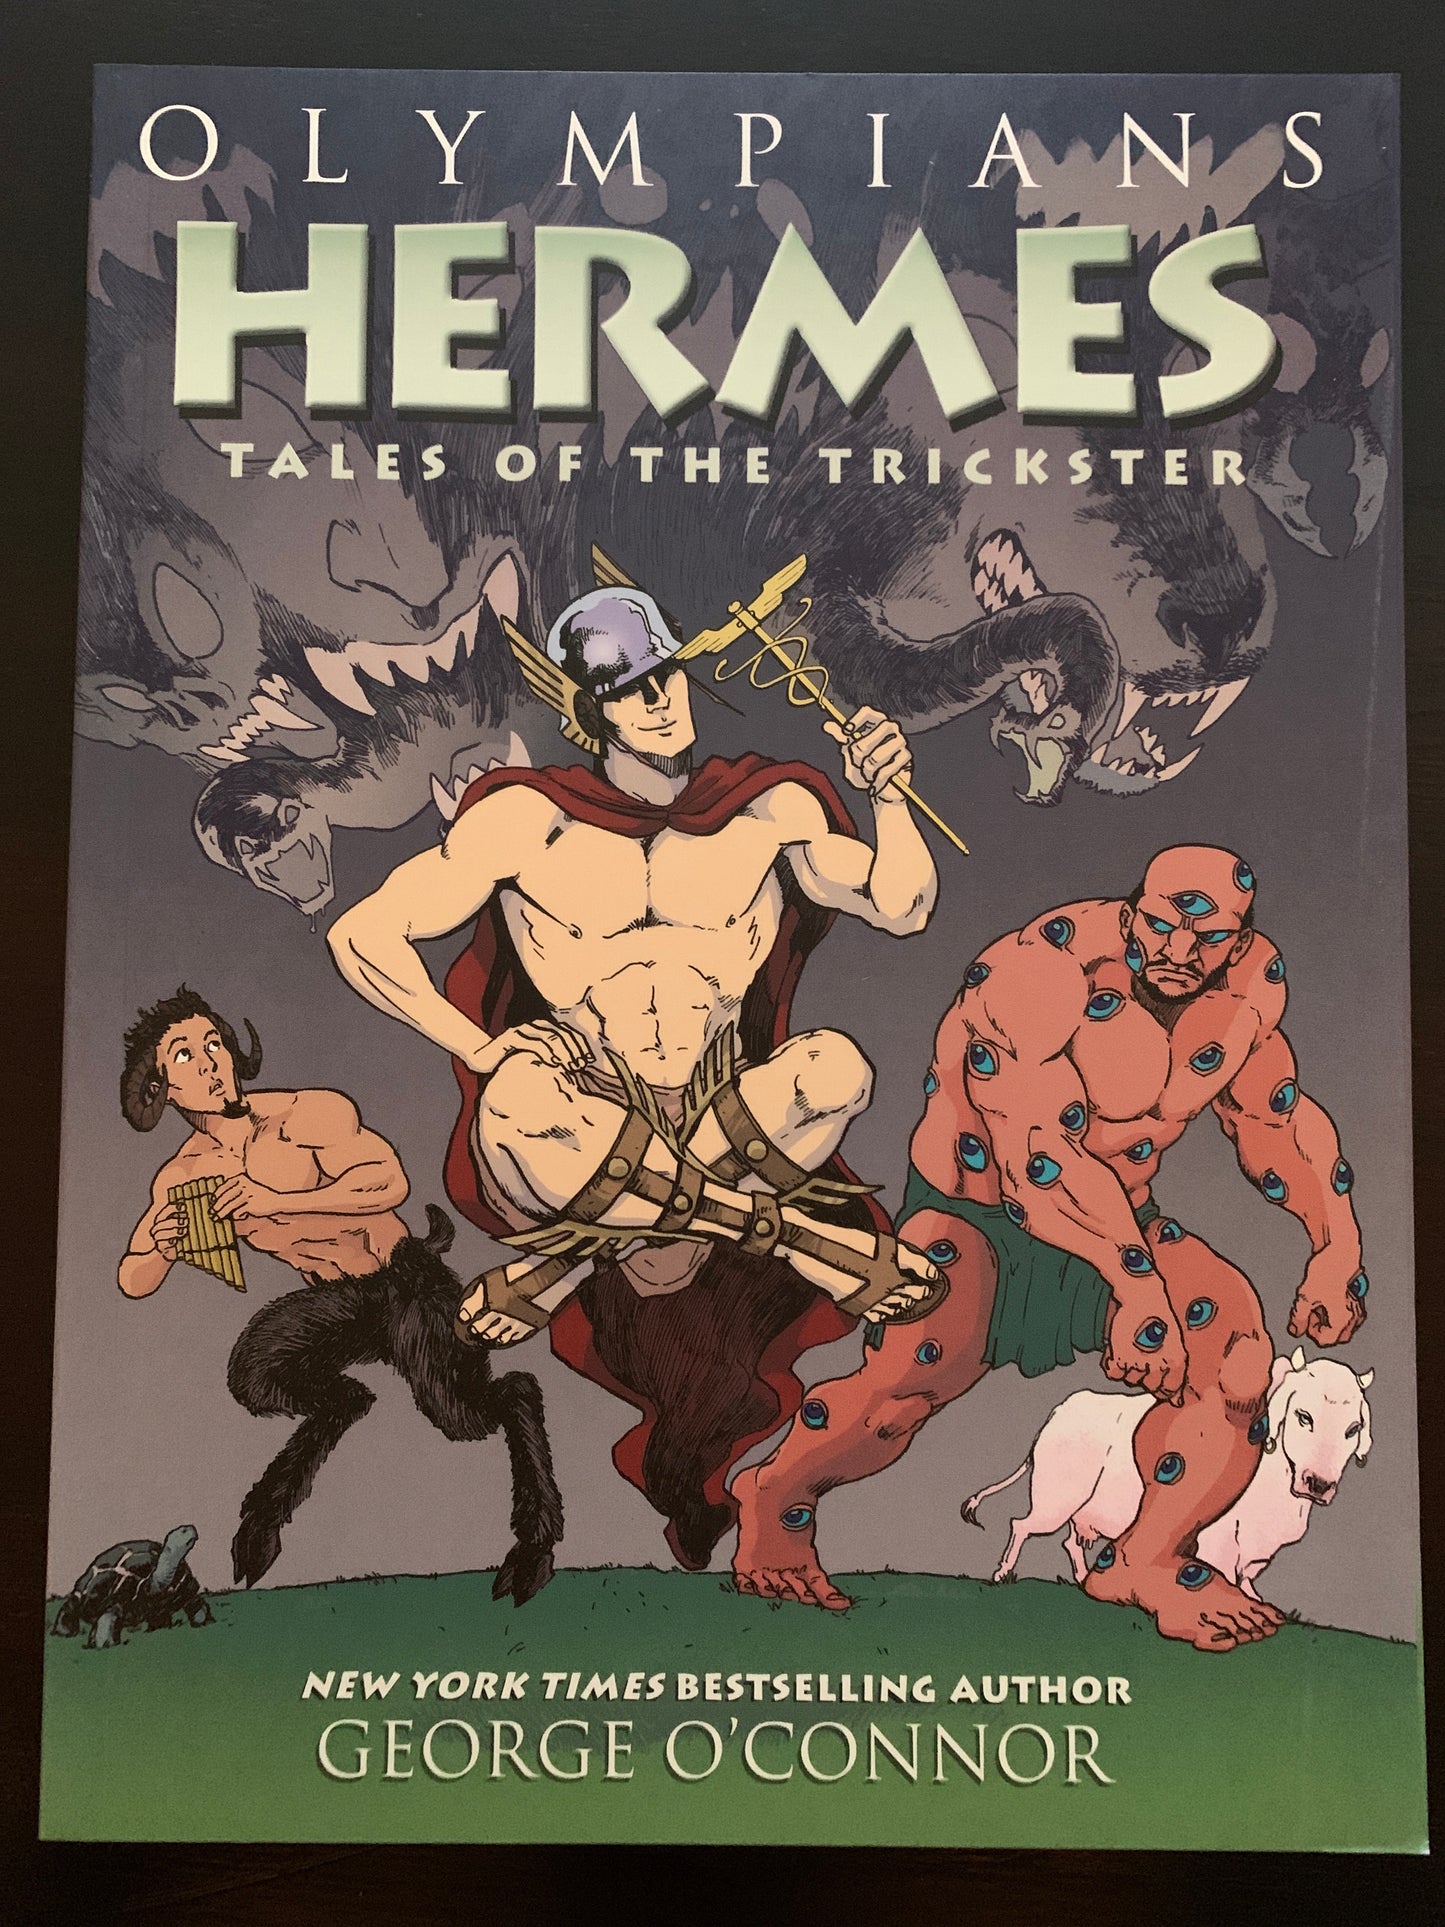 Hermes: Tales of the Trickster (Olympians Vol 10)